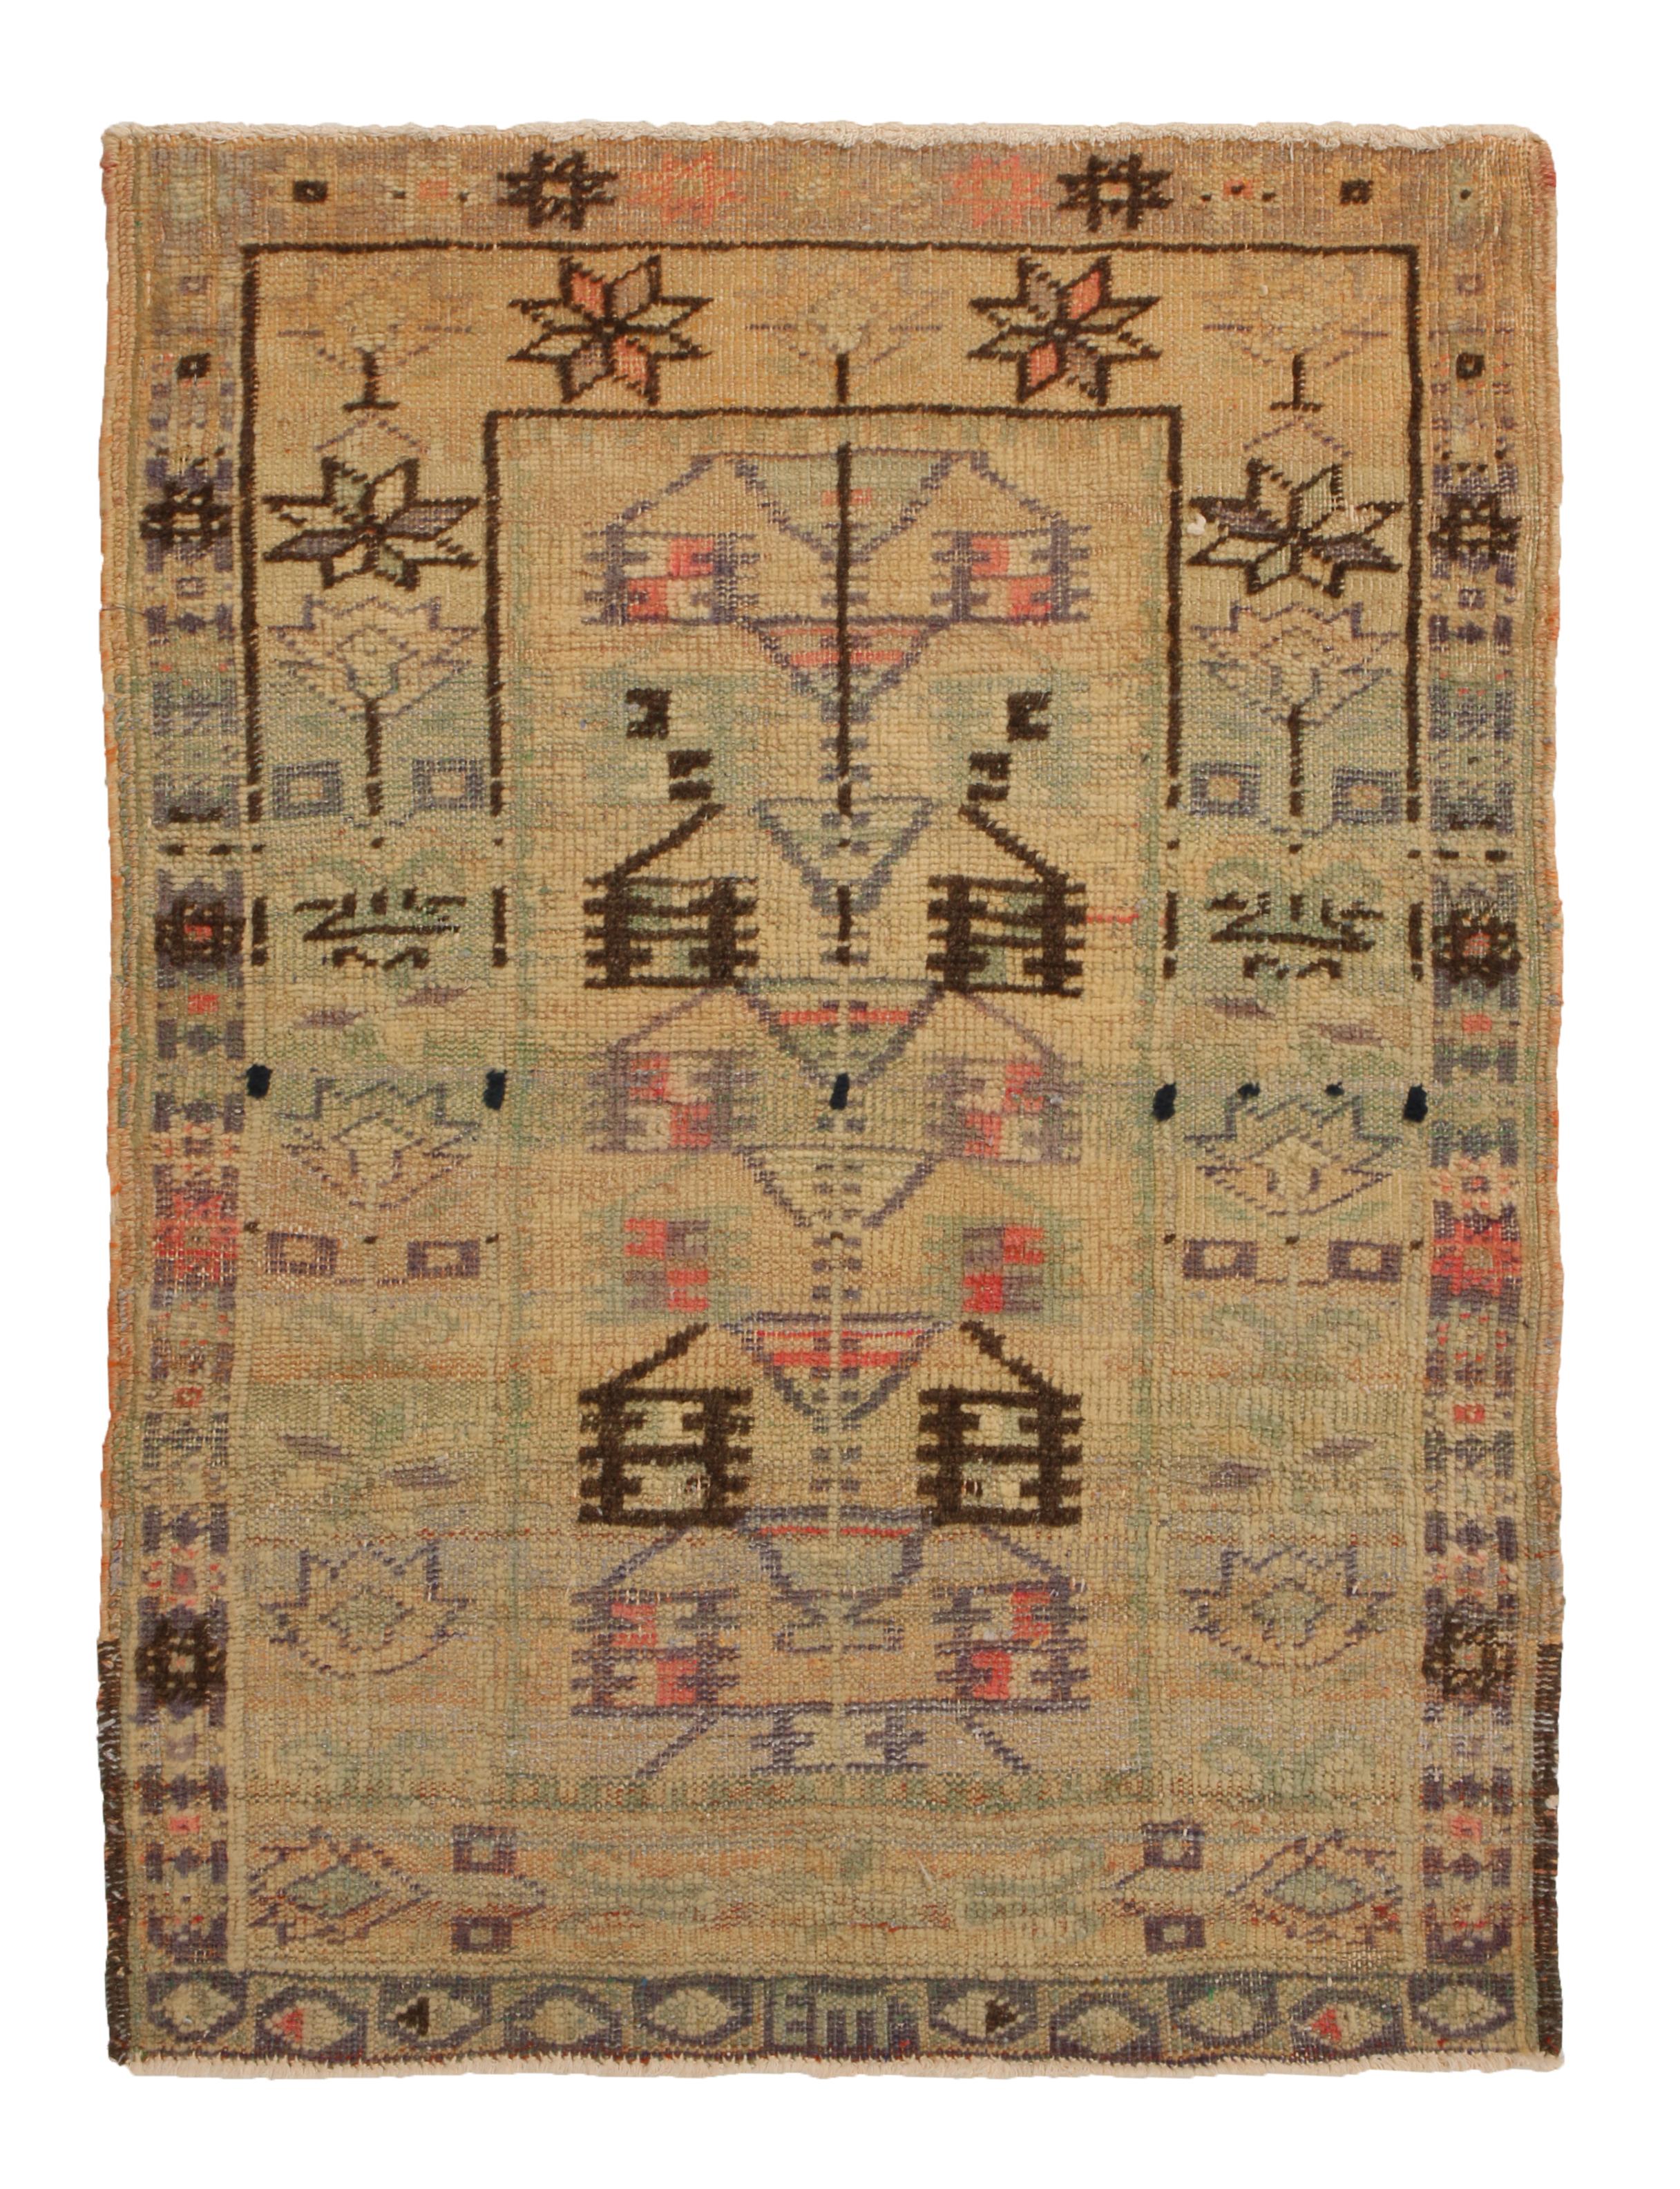 Hand knotted in Turkey between 1880-1900, this antique Gordes rug enjoys a durable body of high-quality low-pile wool with minimal distress in intriguing, uncommon colourways. Complemented by a variety of rare tea green, pastel red, and lavender